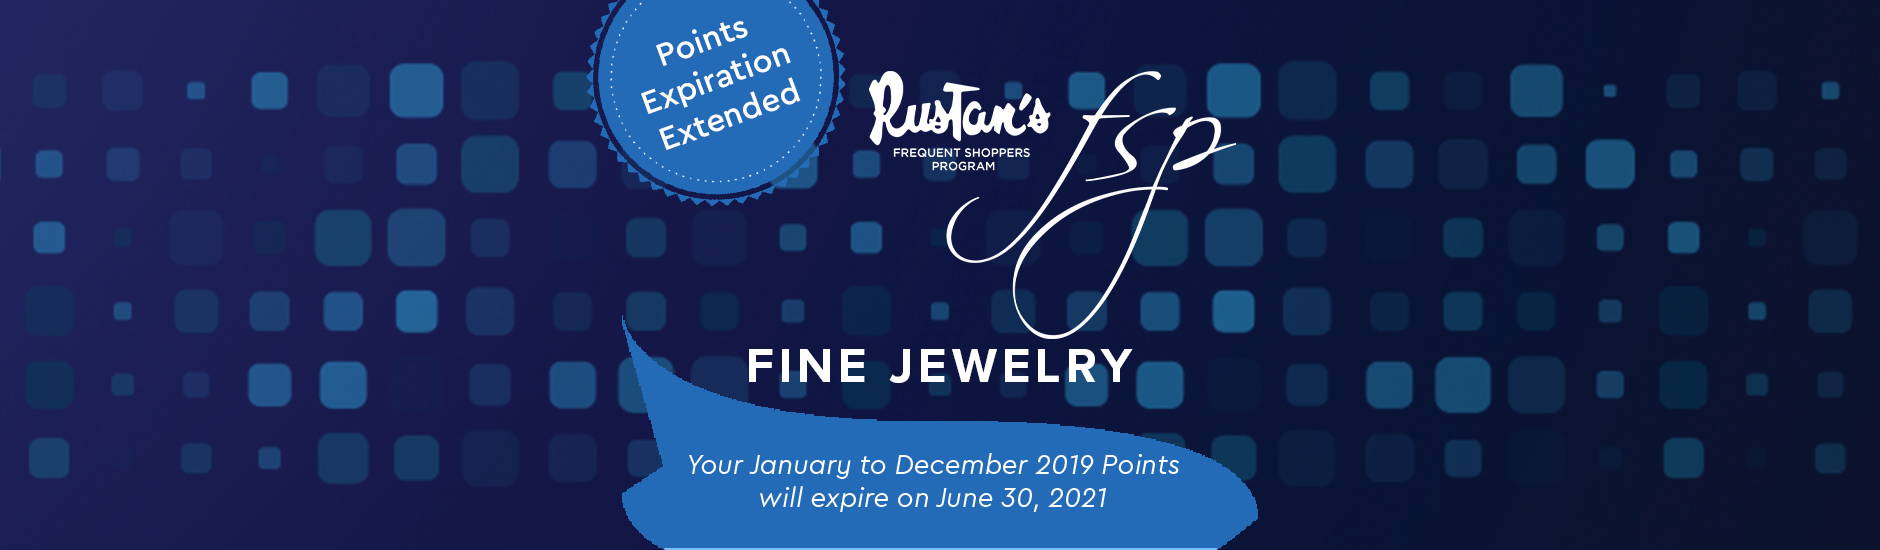 Your FSP Points Are Waiting: Fine Jewelry